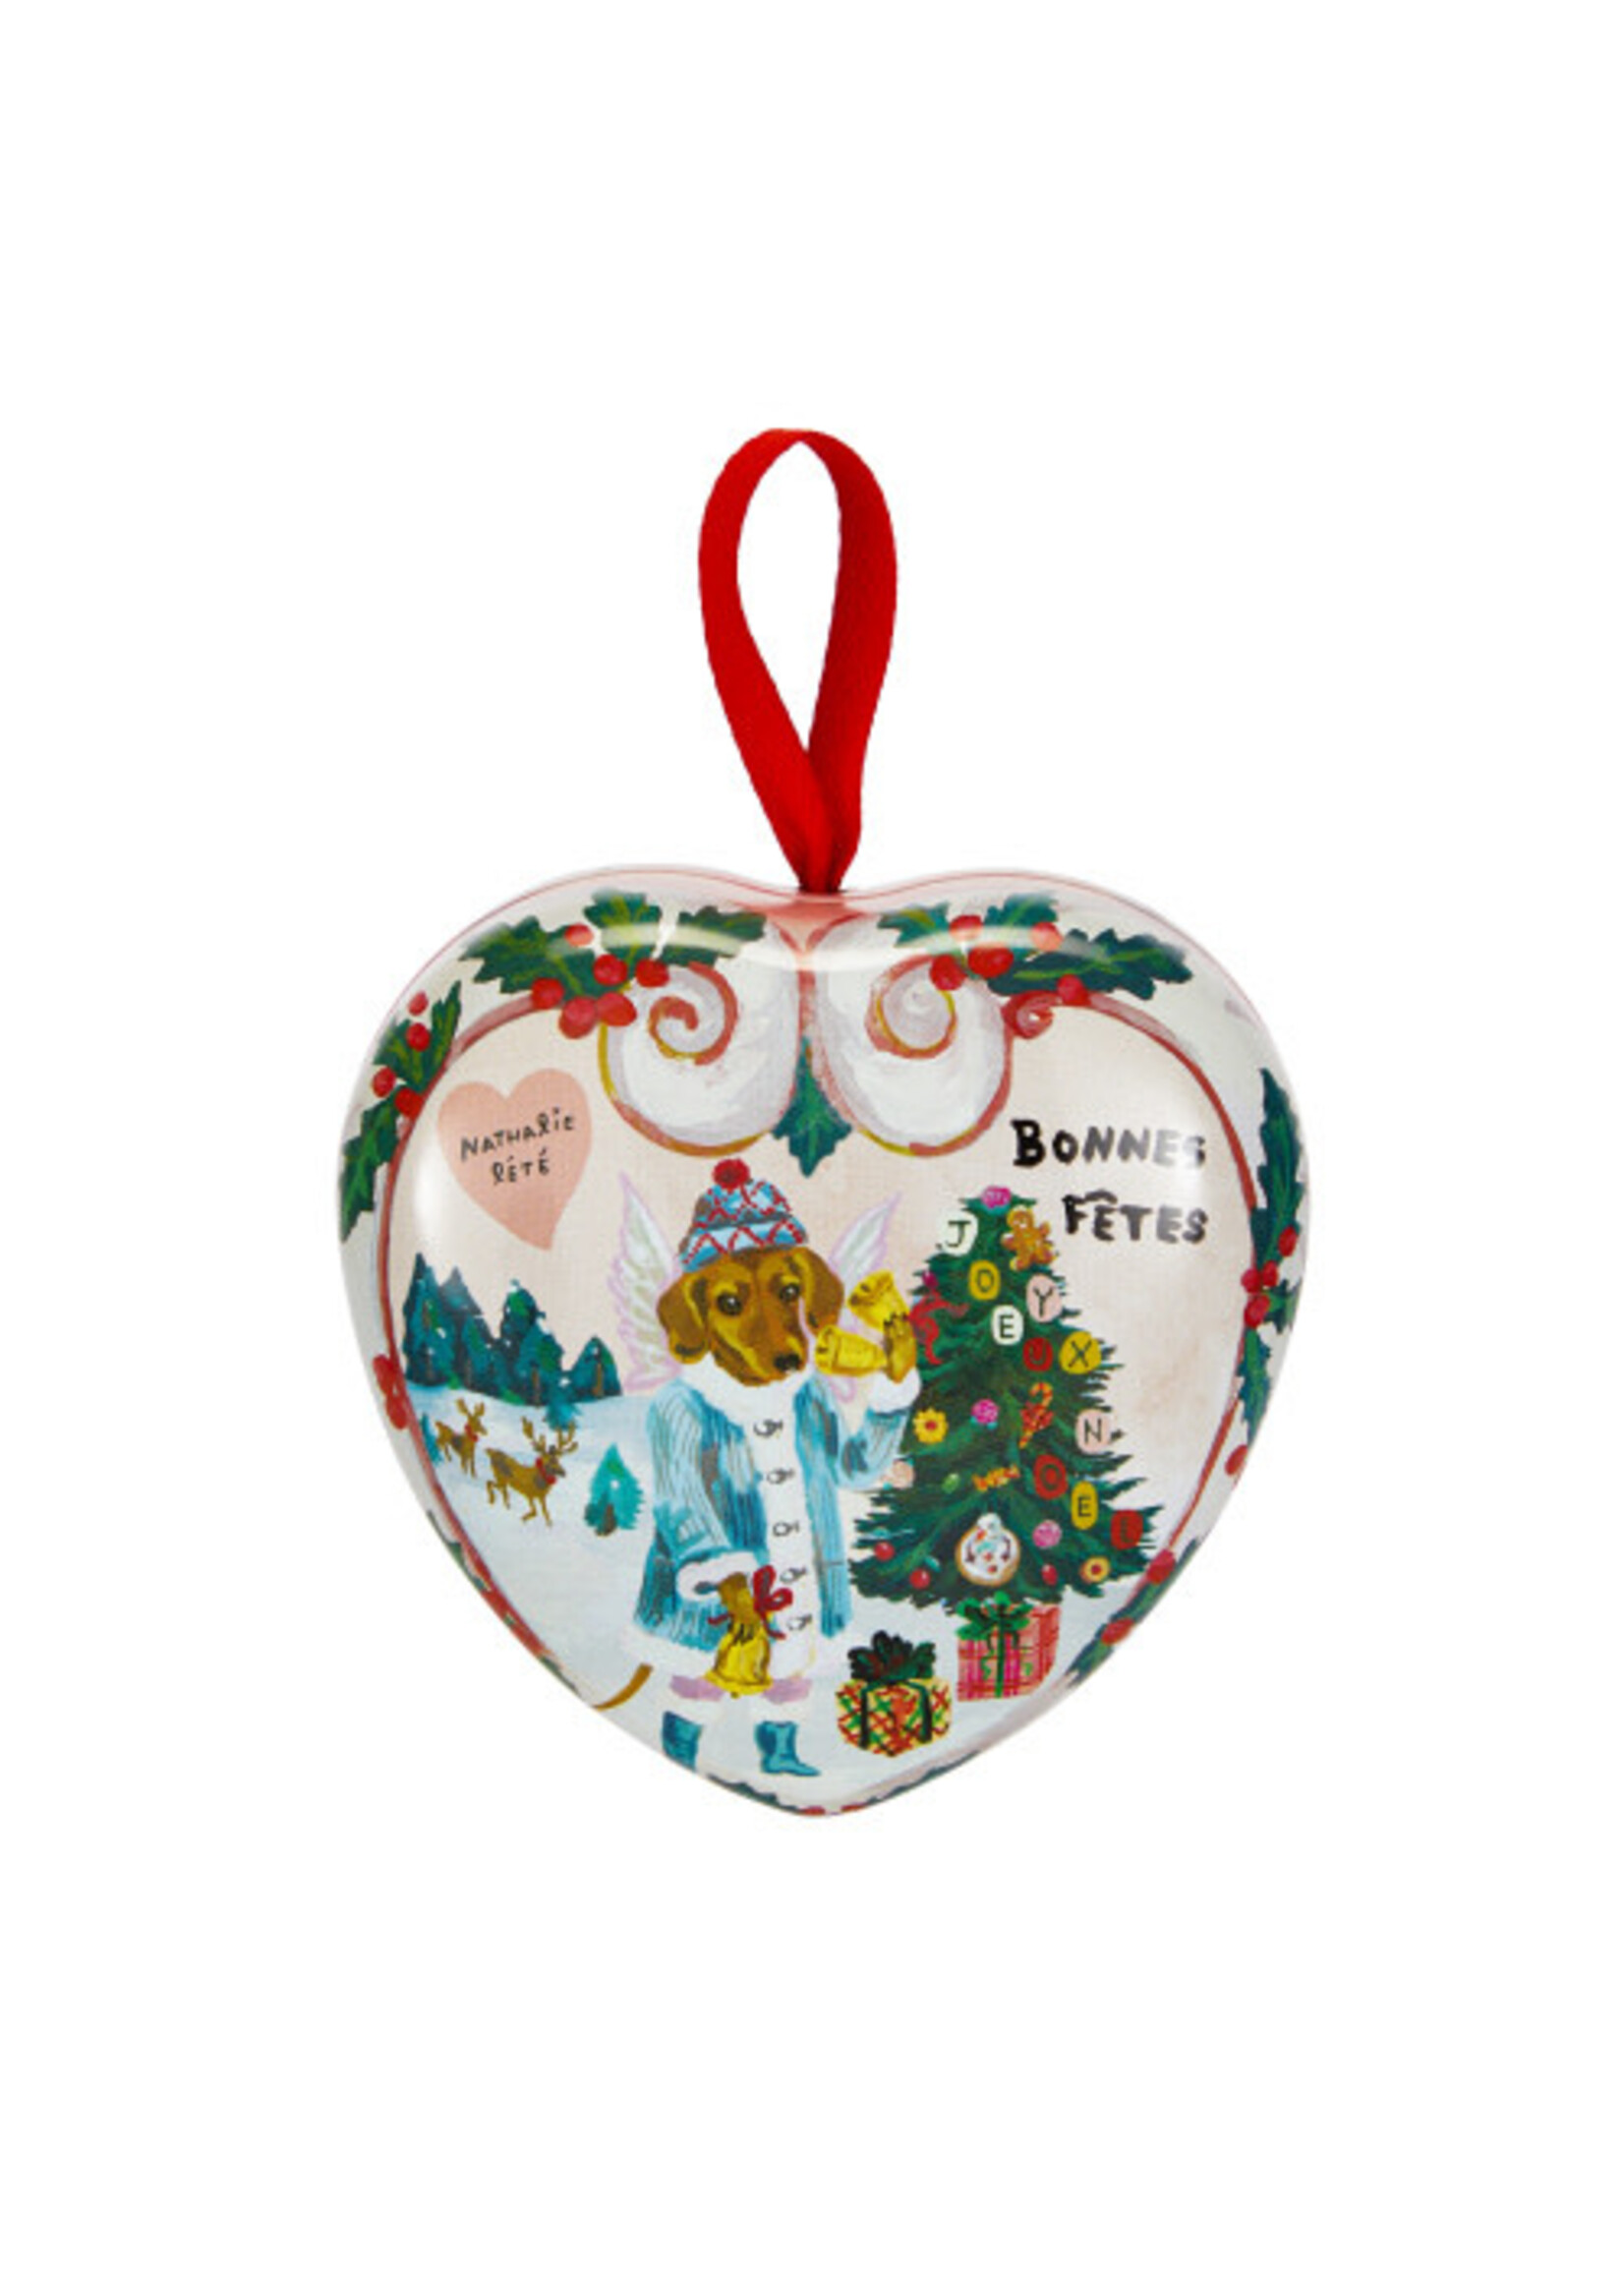 Heathcote & Ivory Ltd. Canada Nathalie Lete Christmas Scented Soap In Heart Shaped Tin 90g